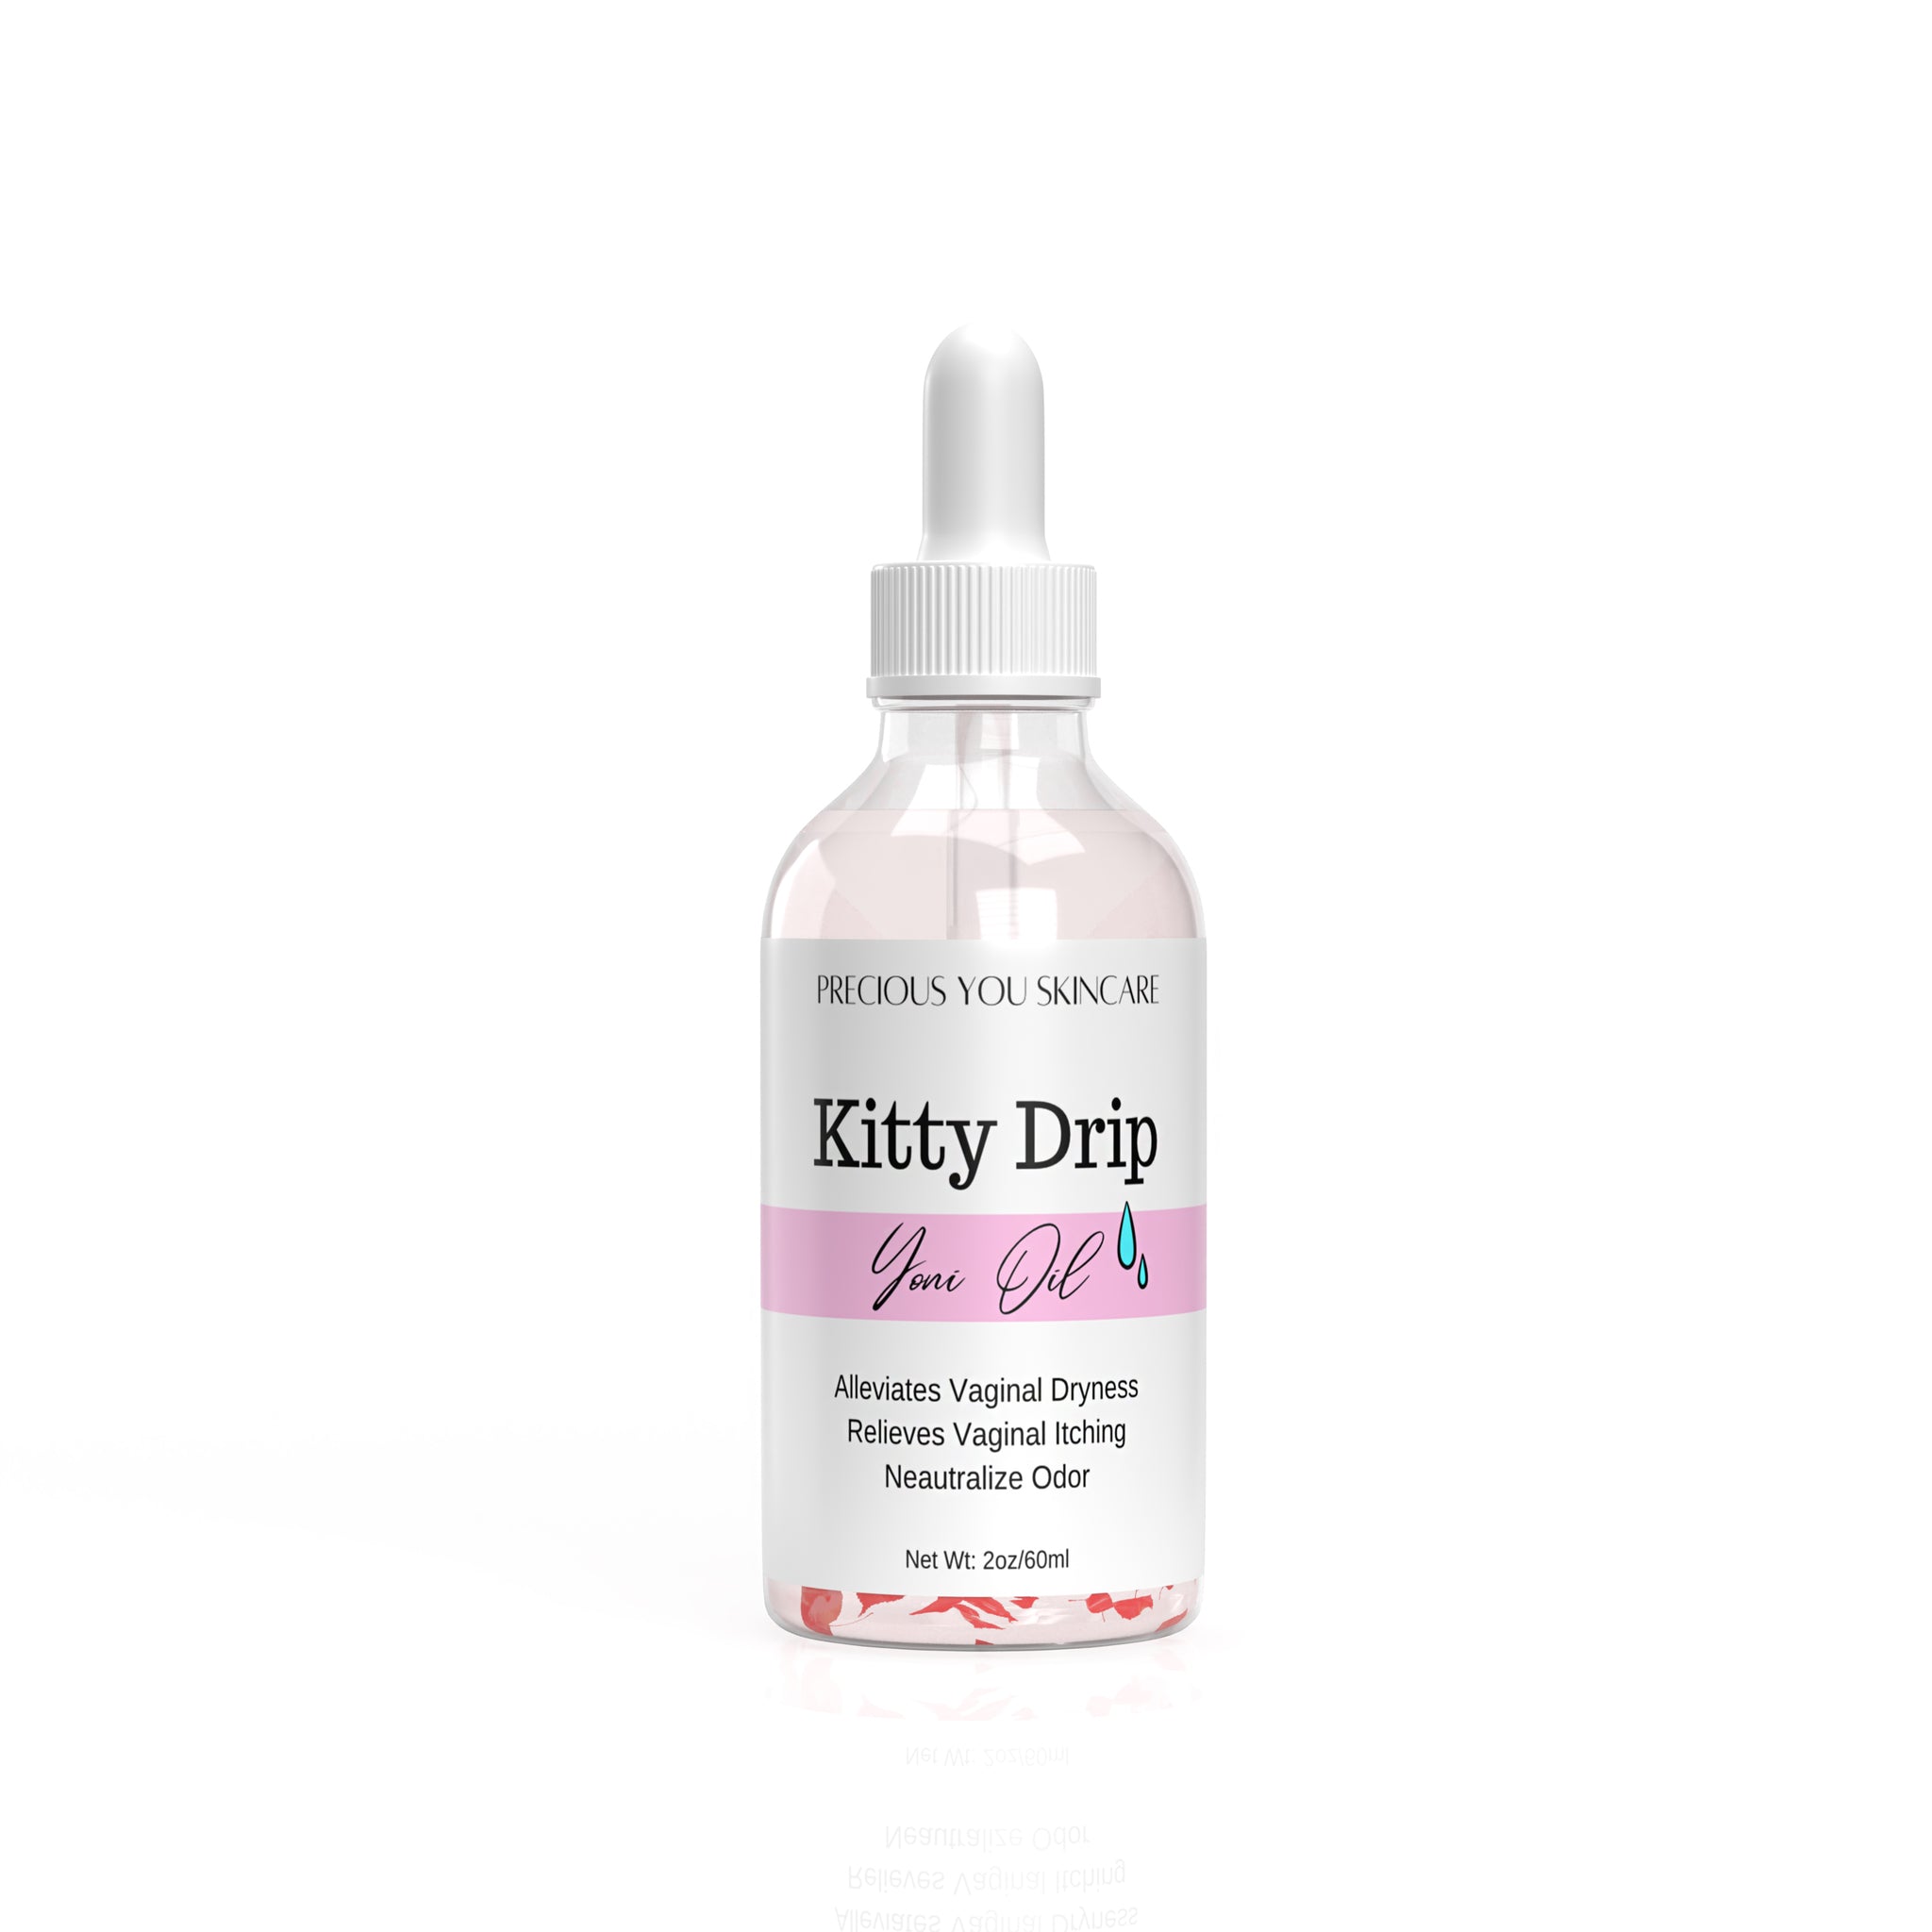 Kitty drip yoni oil - Rose and peach oil